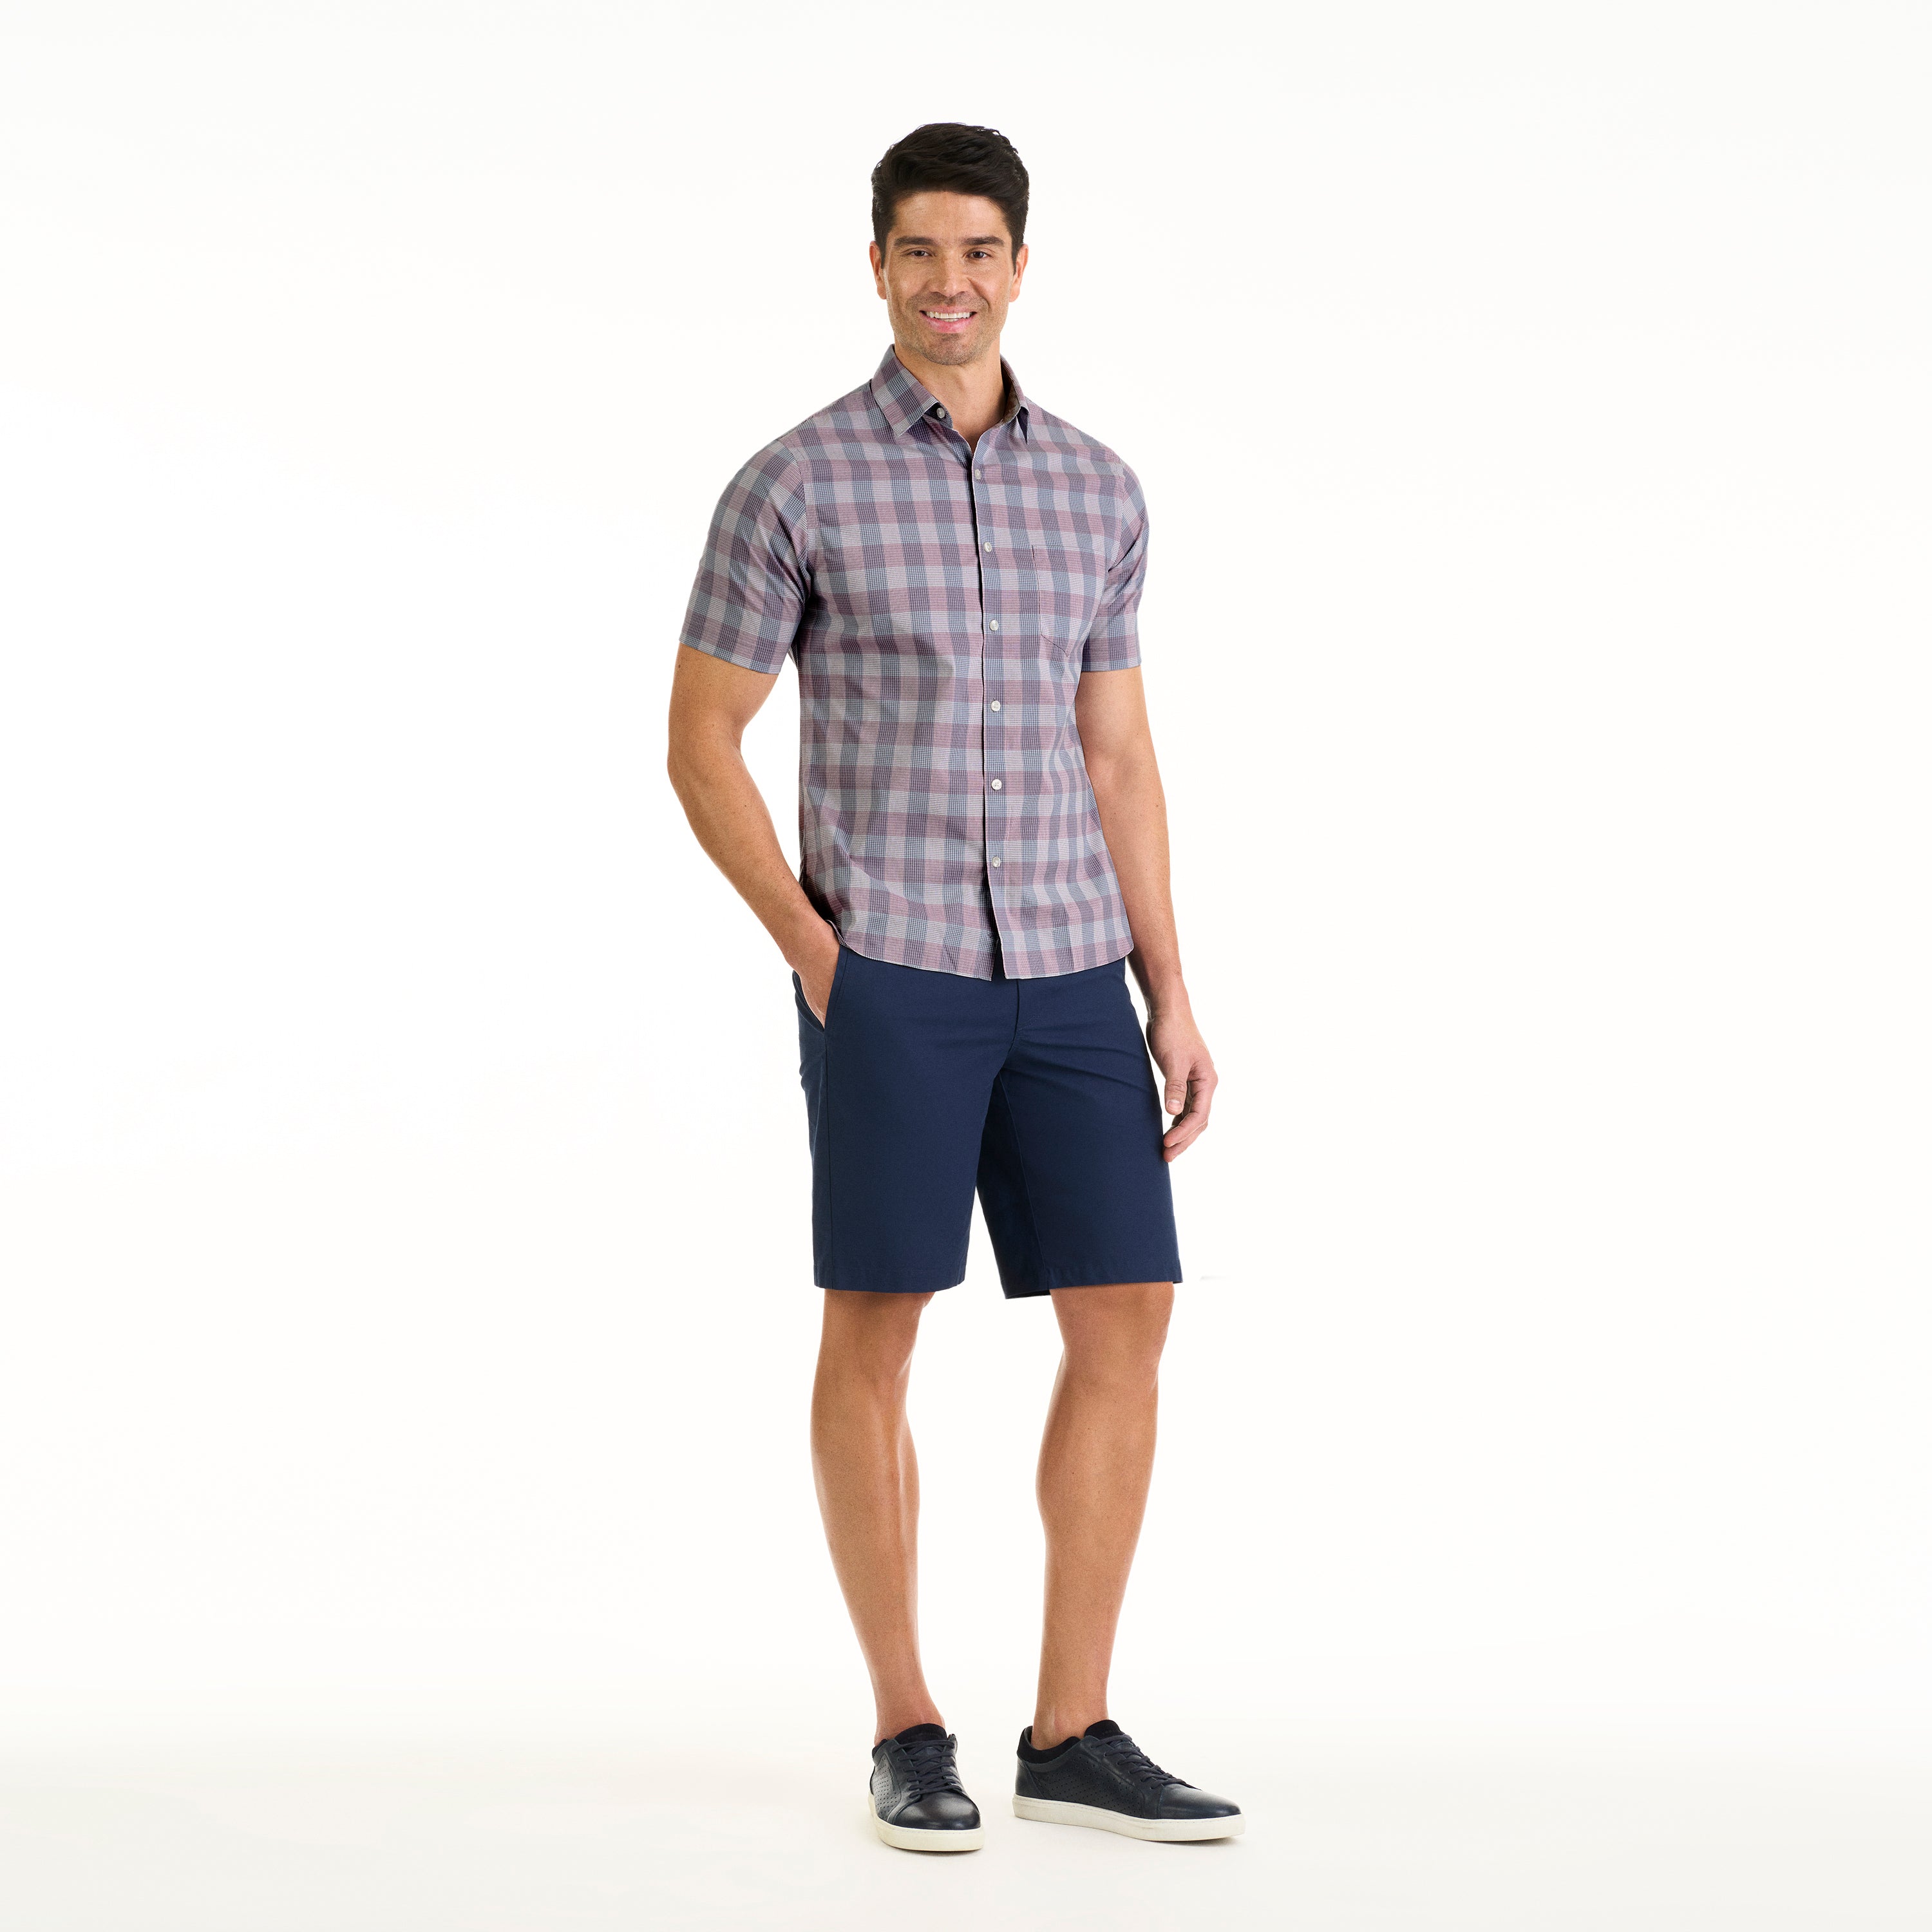 Essential Stain Shield Wovens Gingham Check - Regular Fit